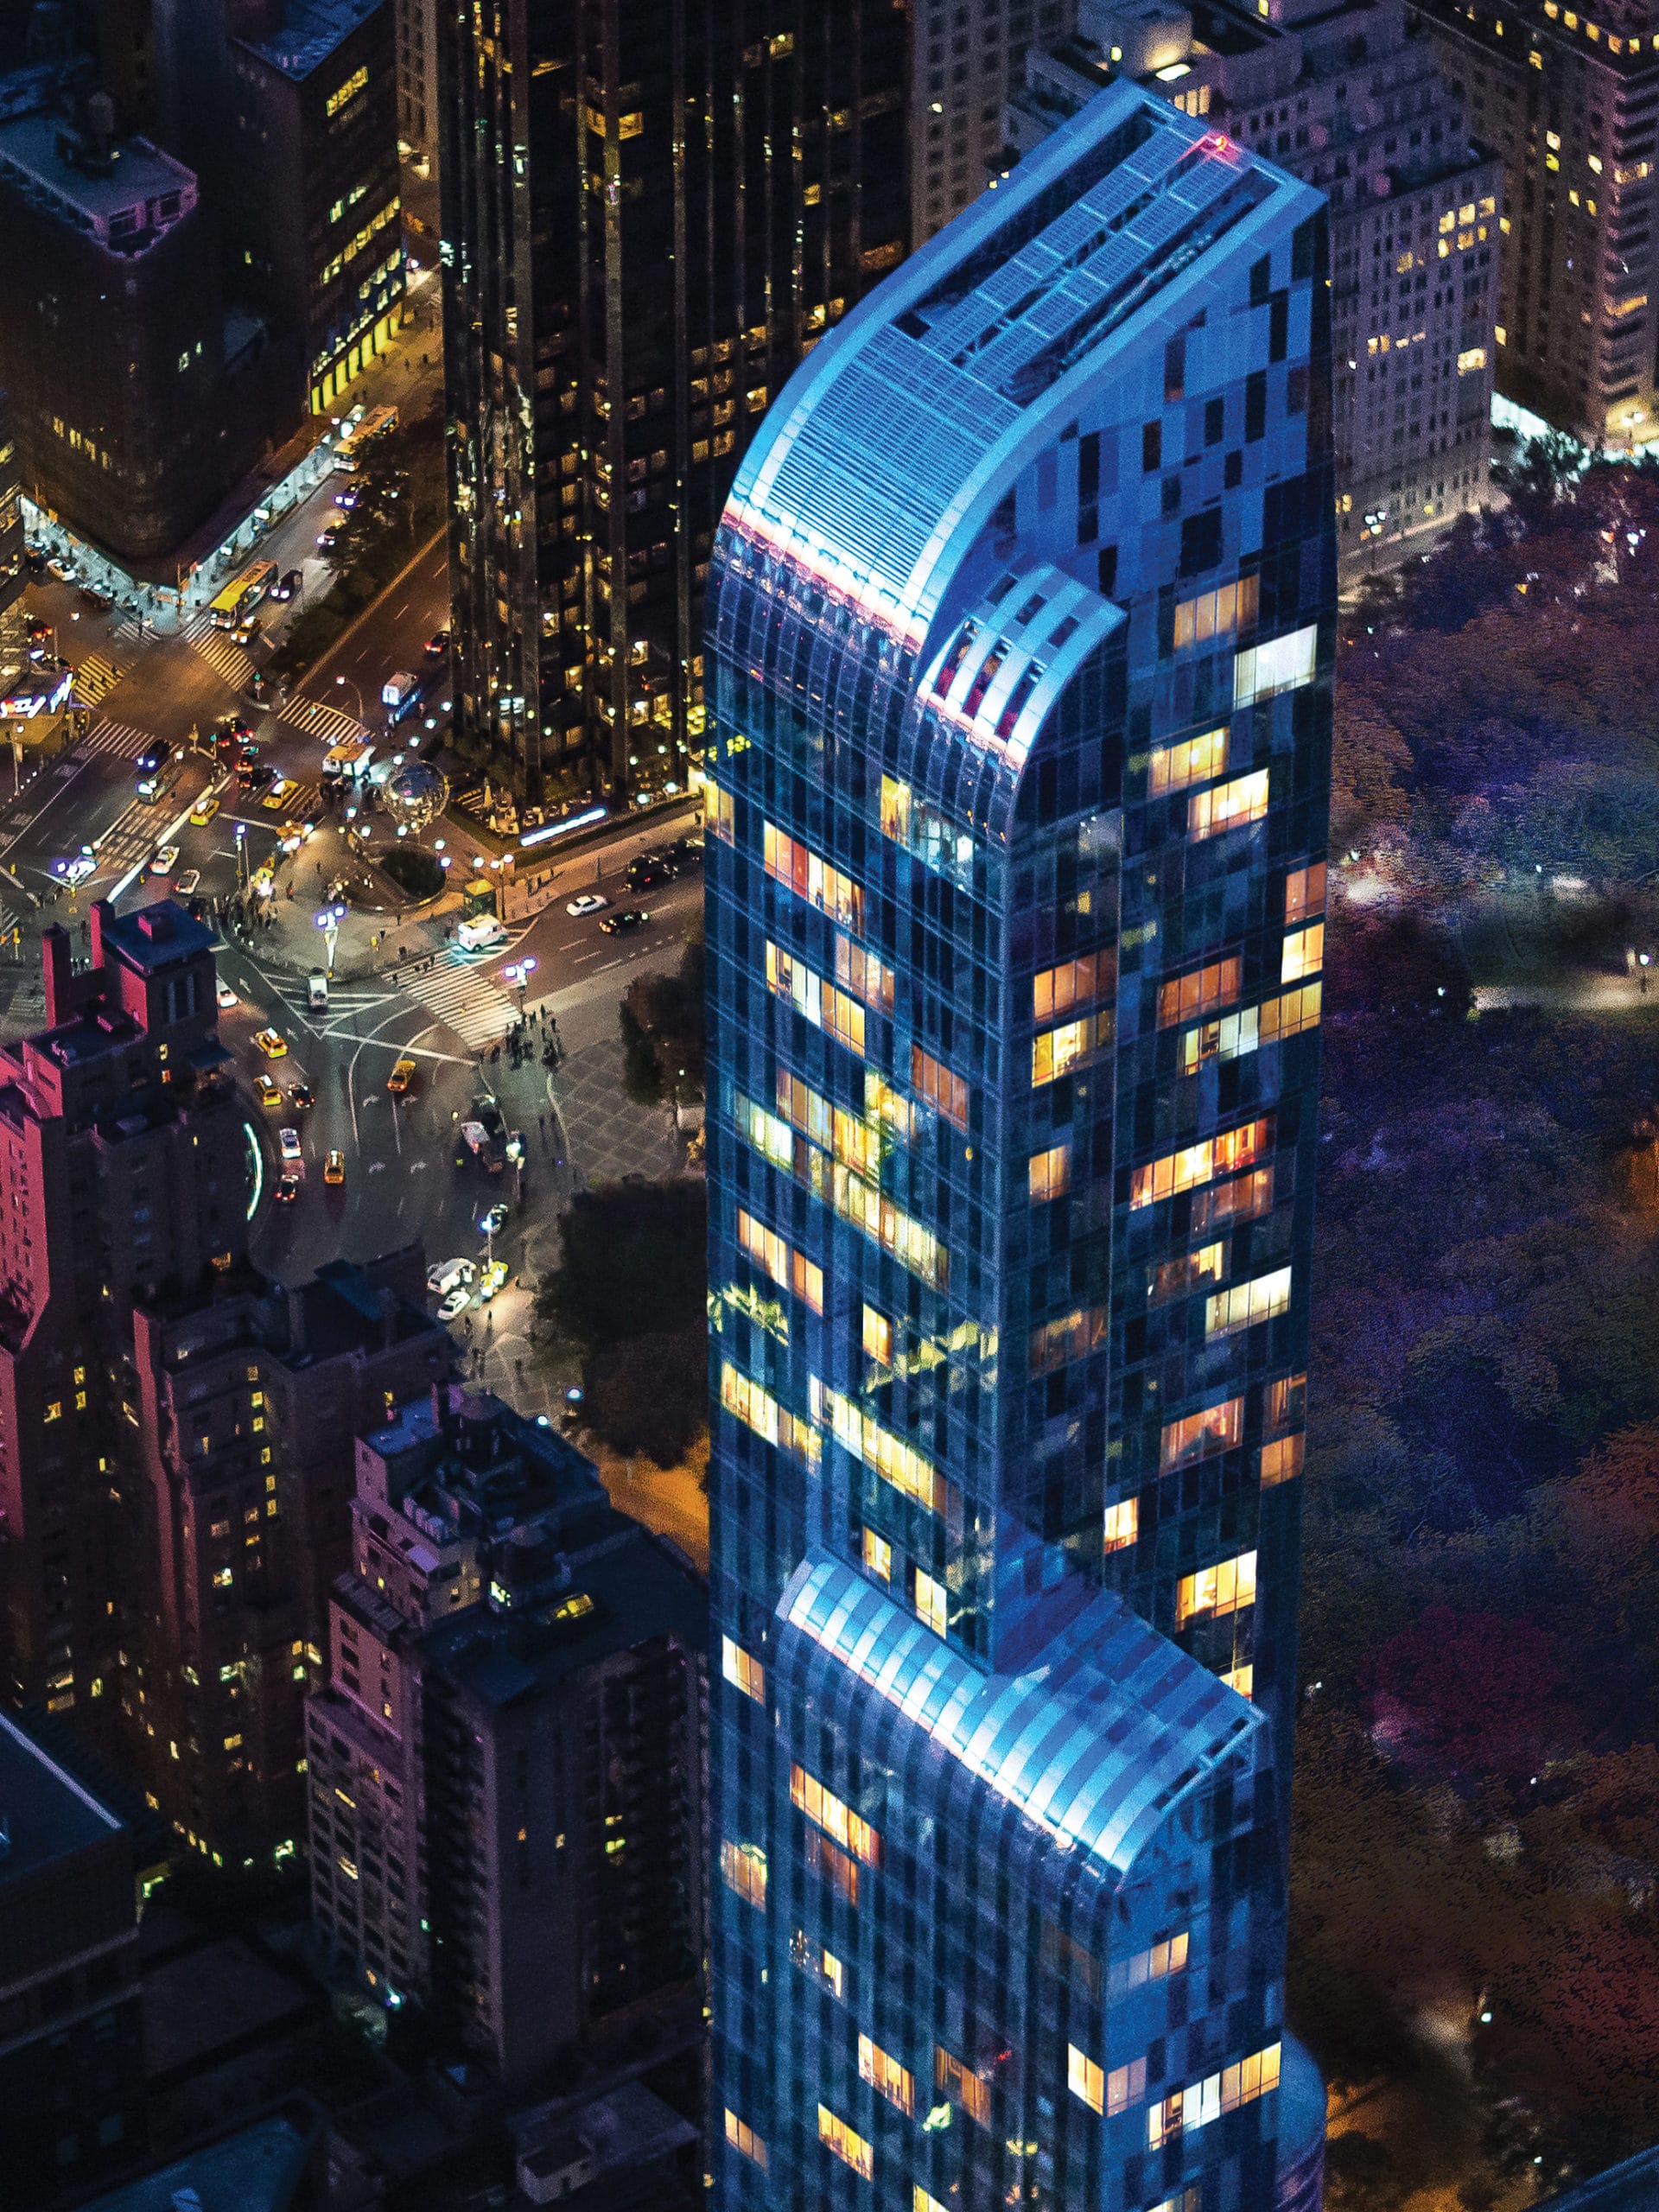 Aerial view of One57 luxury condos in Manhattan, NY. Night time looking down at the tower with city lights in the background.